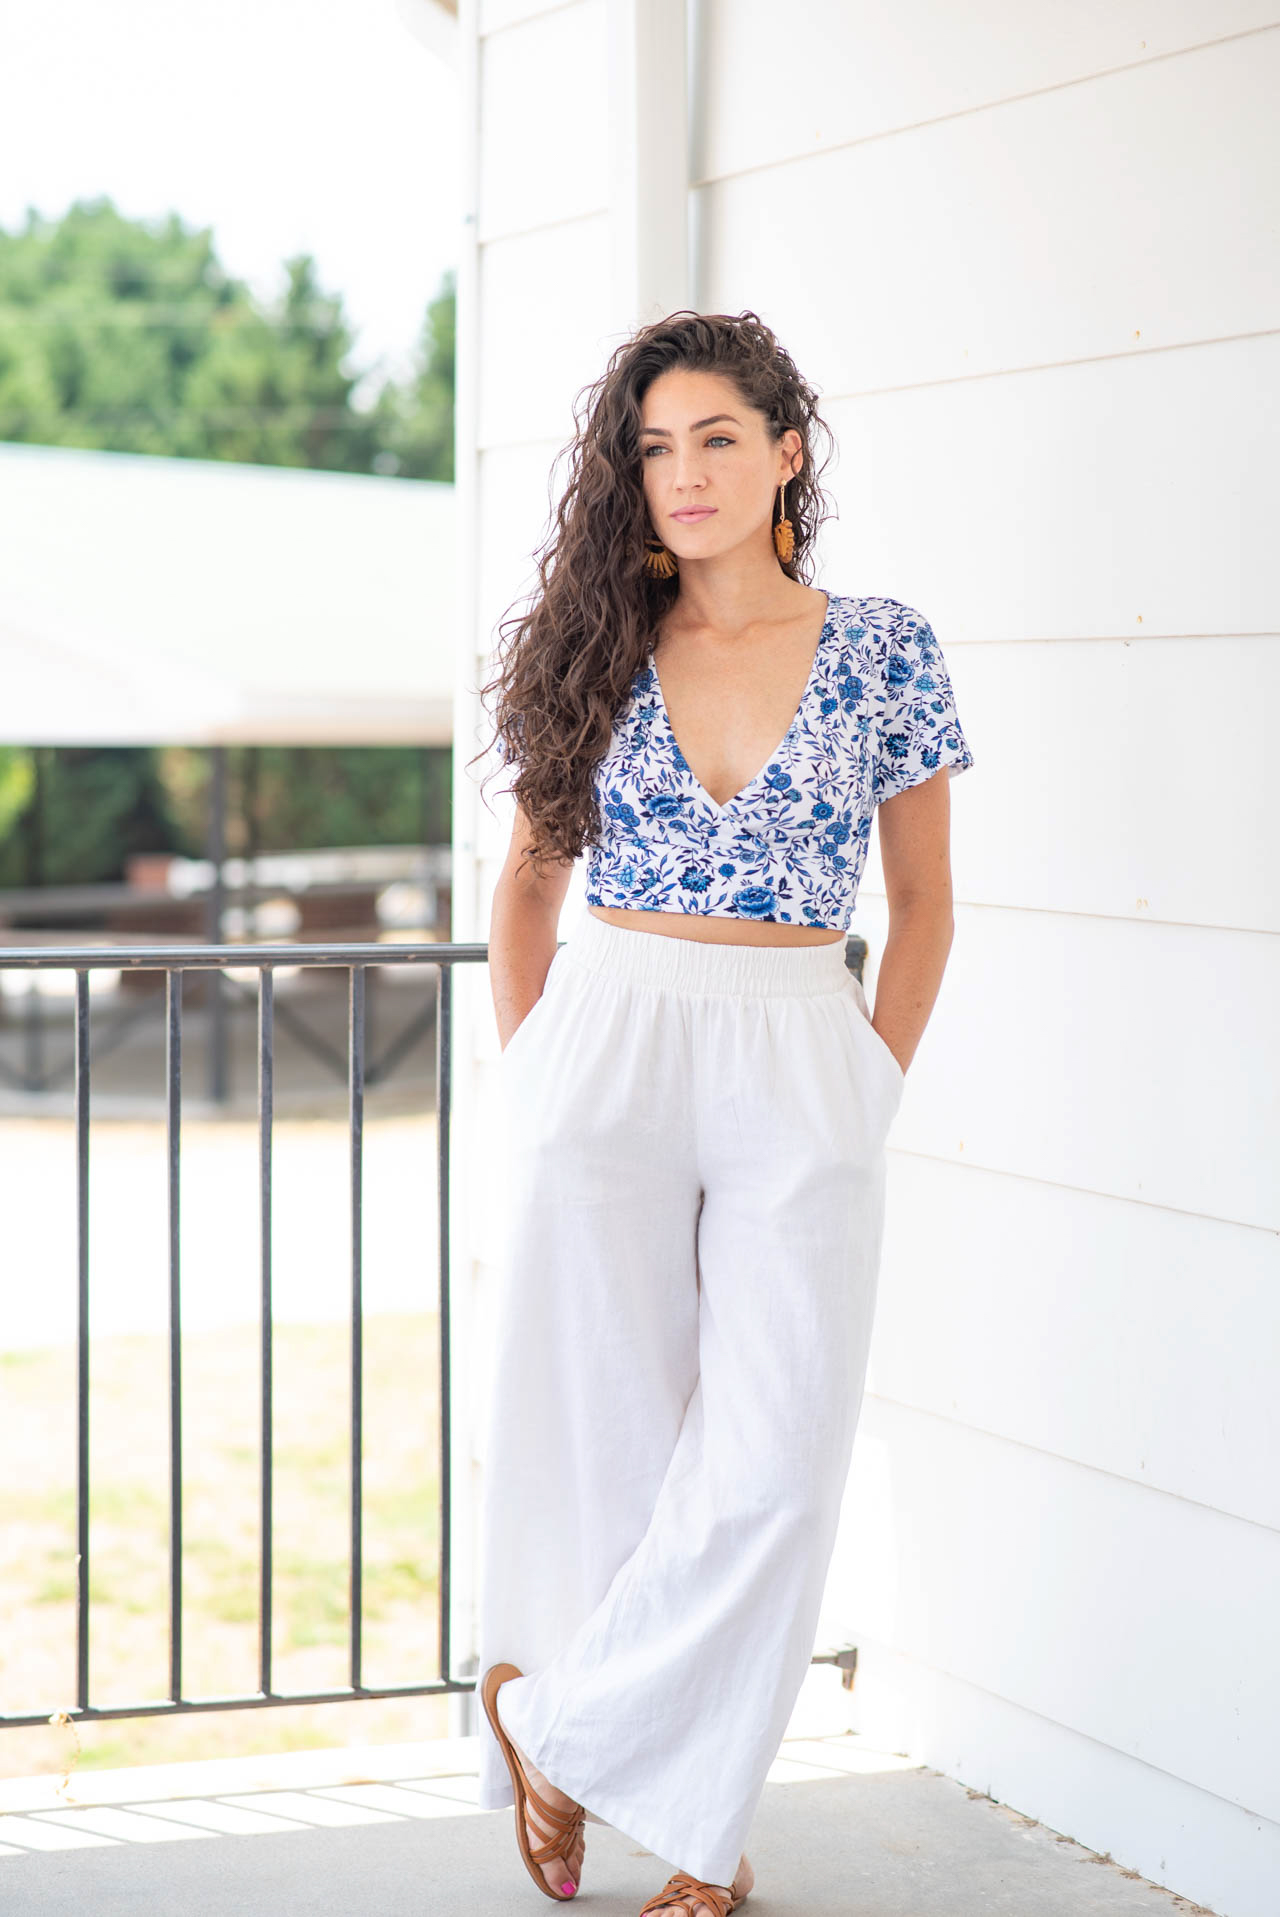 crop top, open back crop top, atlanta blogger, style blogger, live style travel, erica valentin blog, atlanta bloggers, fashion bloggers, floral crop top, summer outfit ideas, boho style, 